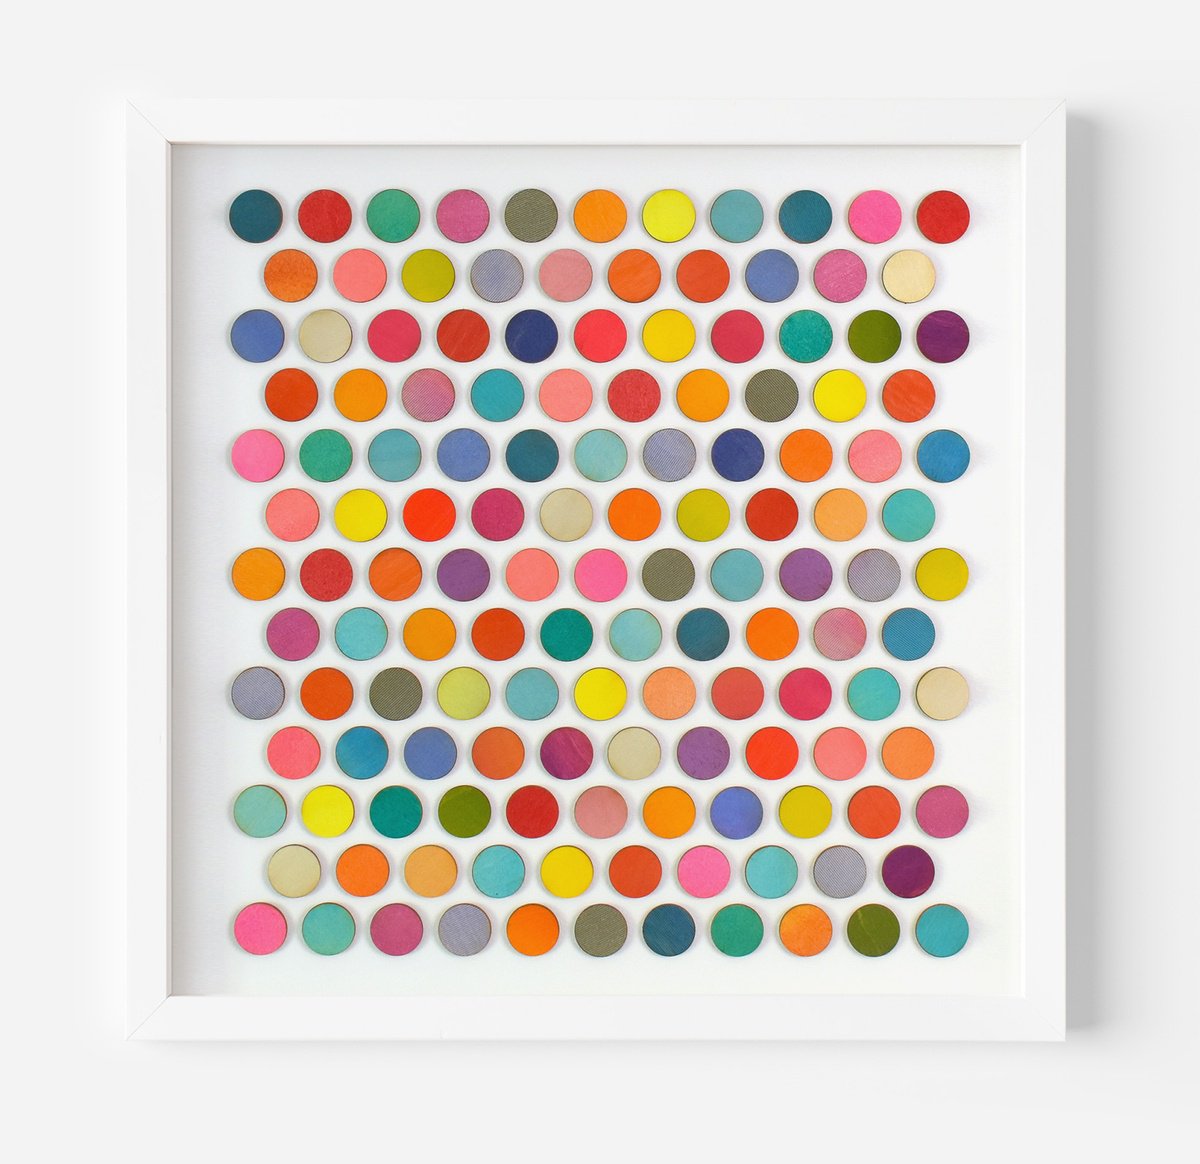 One Hundred And Thirty Seven Painted Dots Collage by Amelia Coward